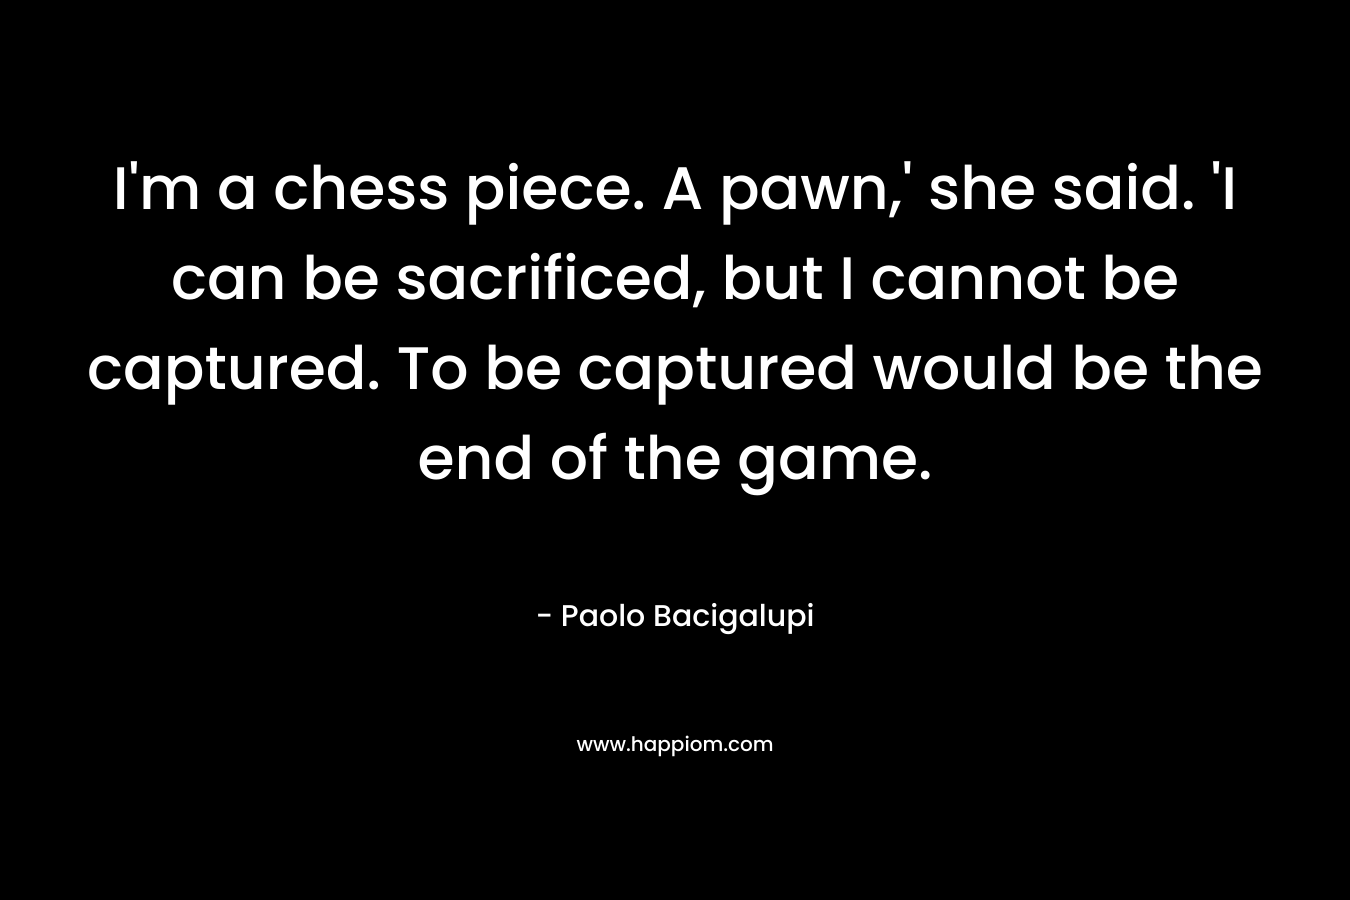 I'm a chess piece. A pawn,' she said. 'I can be sacrificed, but I cannot be captured. To be captured would be the end of the game.